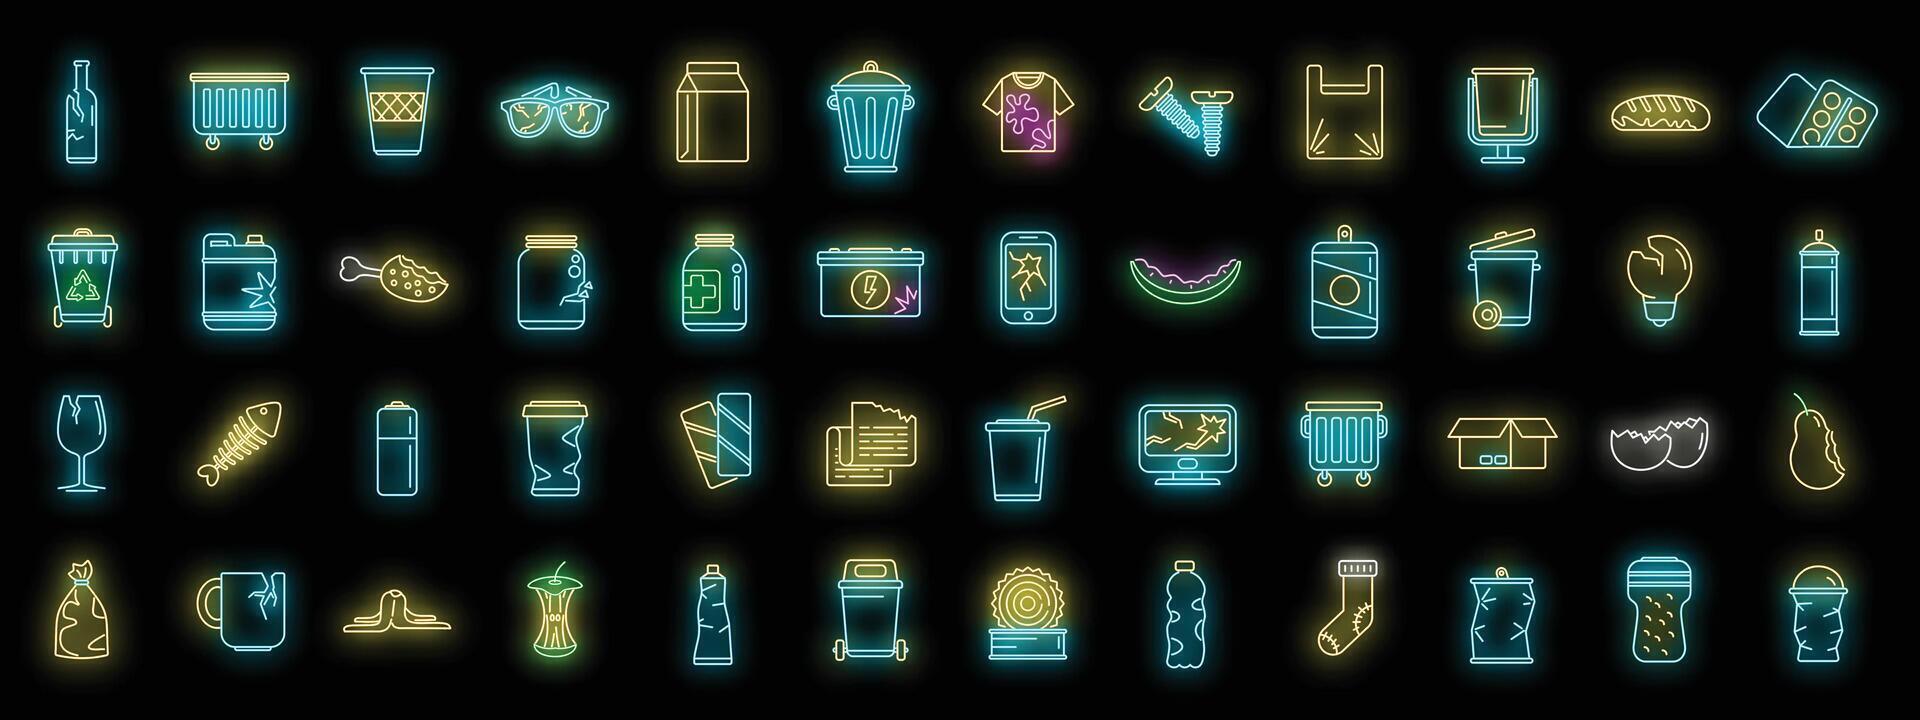 Waste icons set vector neon